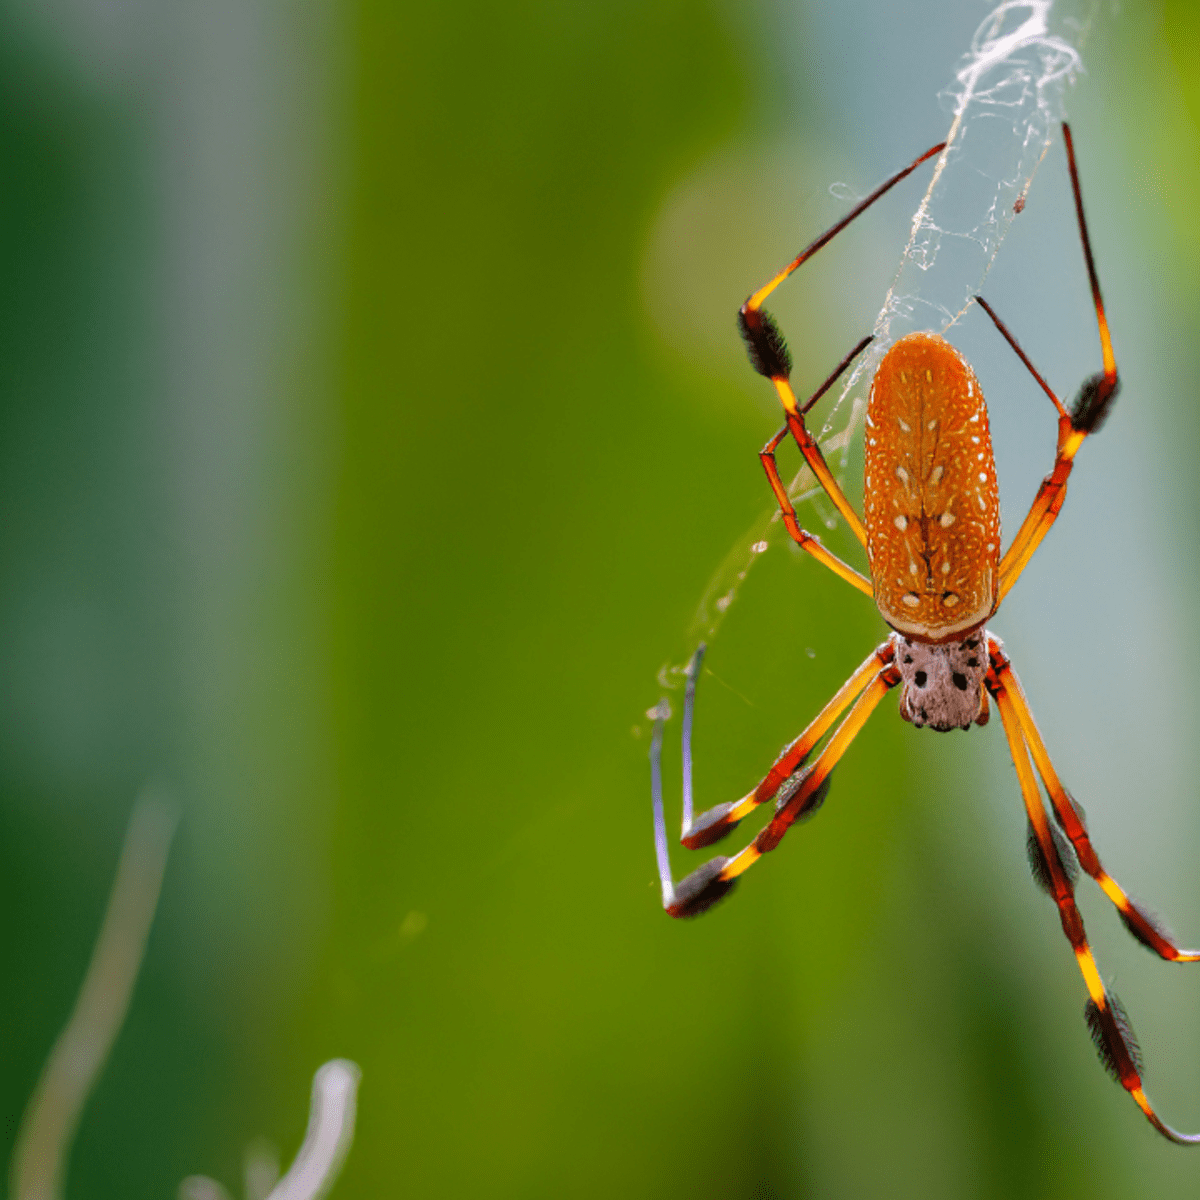 6 Biggest Spiders in Florida - Owlcation